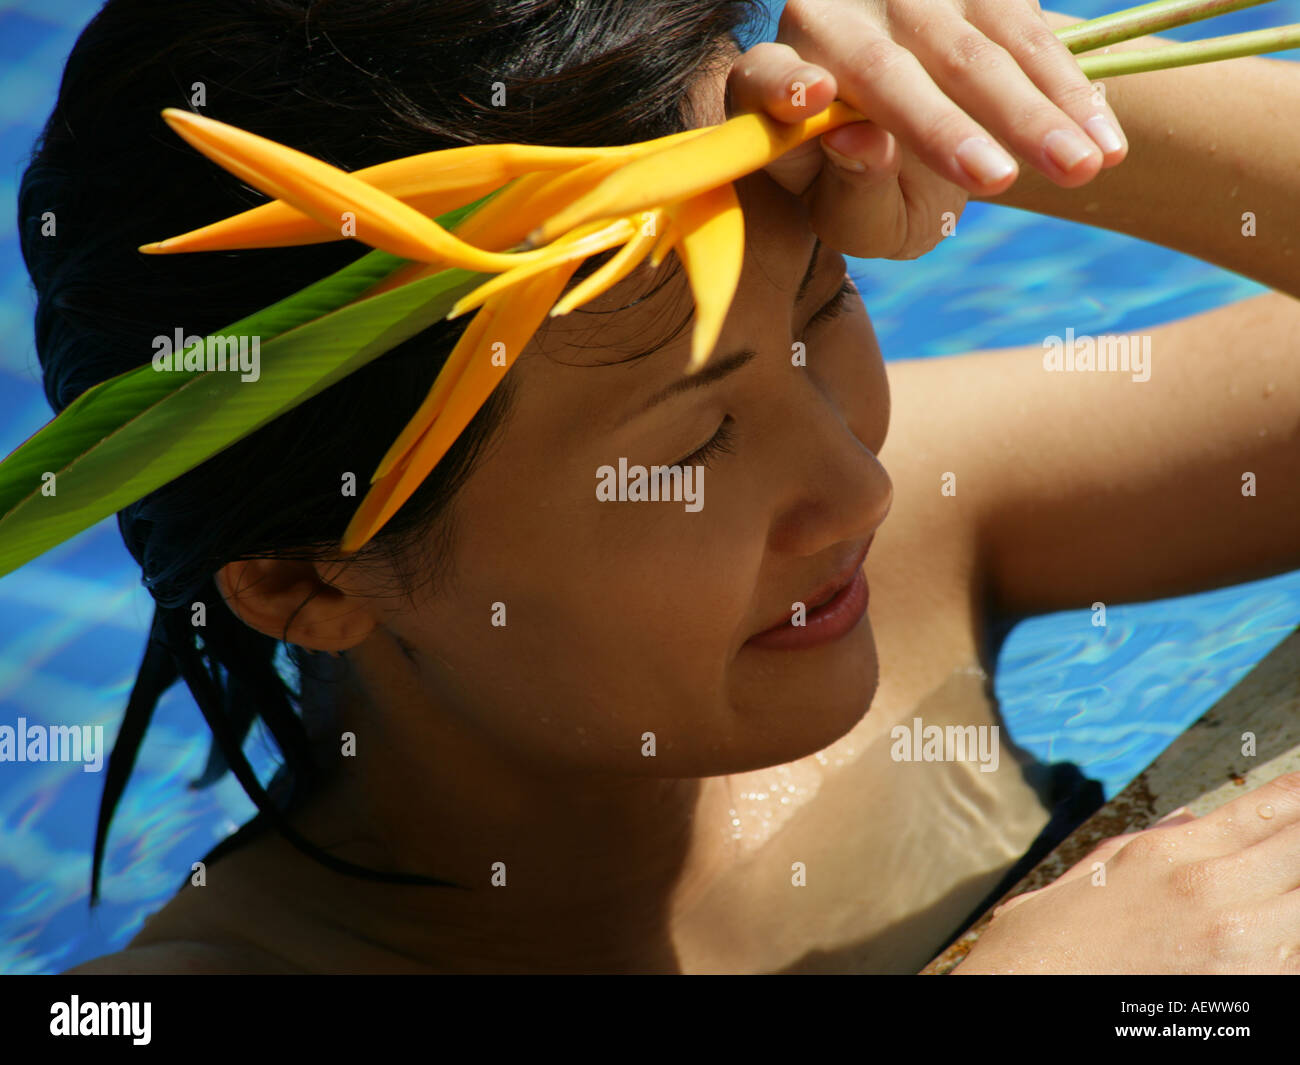 Close up of a young woman leaning at the poolside and holding a bird of paradise flower Caesalpinia gilliesii  Stock Photo